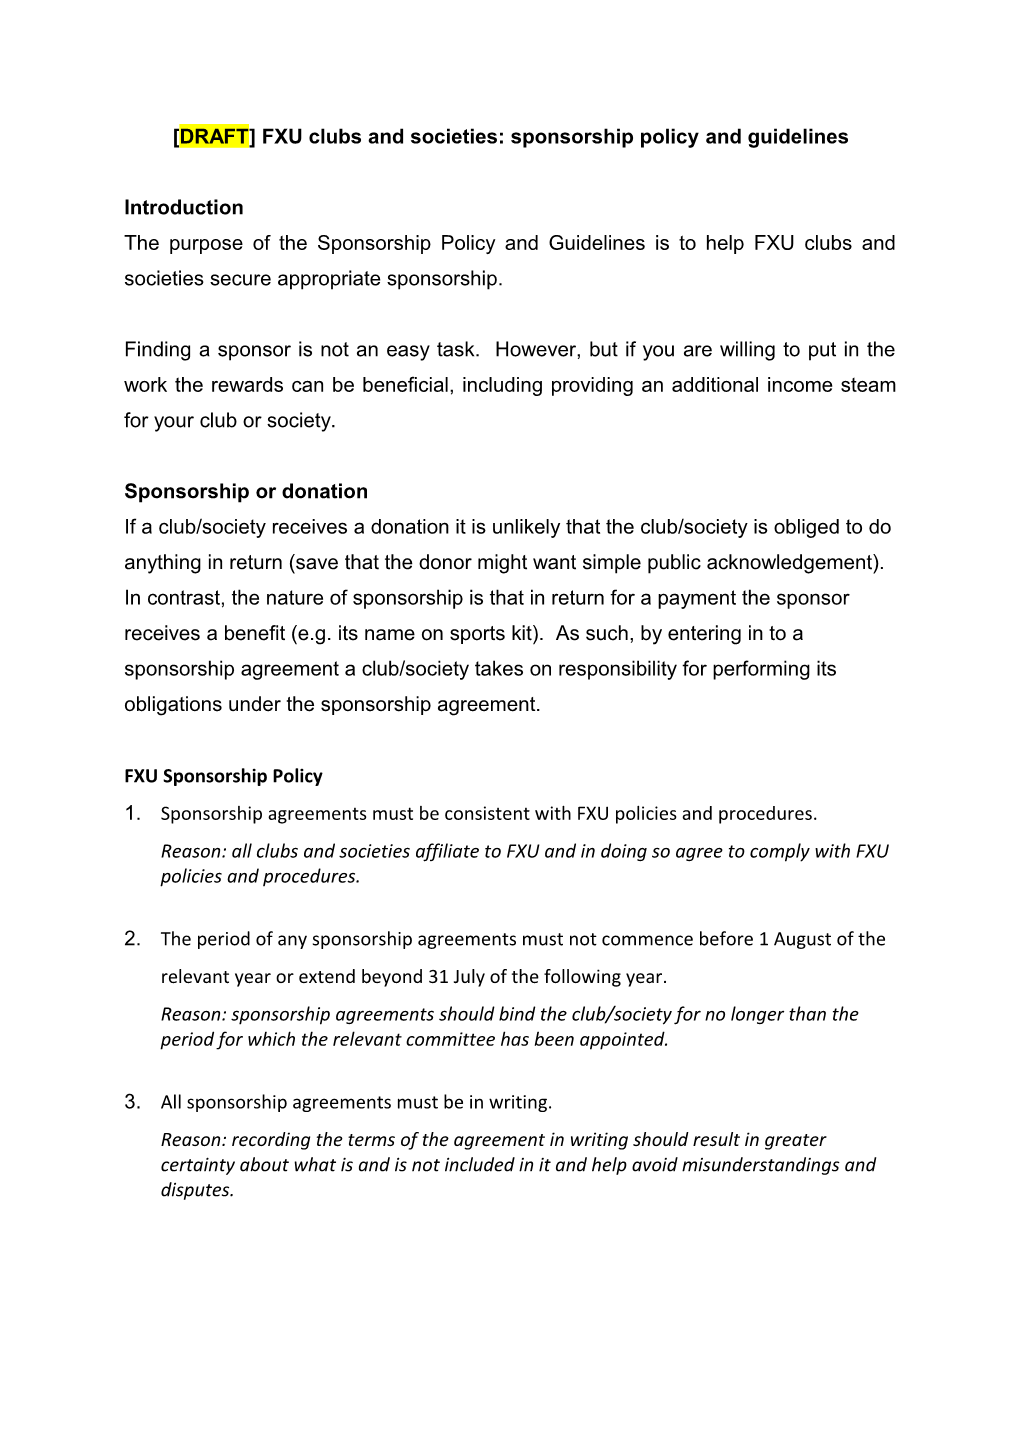 DRAFT FXU Clubs and Societies: Sponsorship Policy RS1 and Guidelines